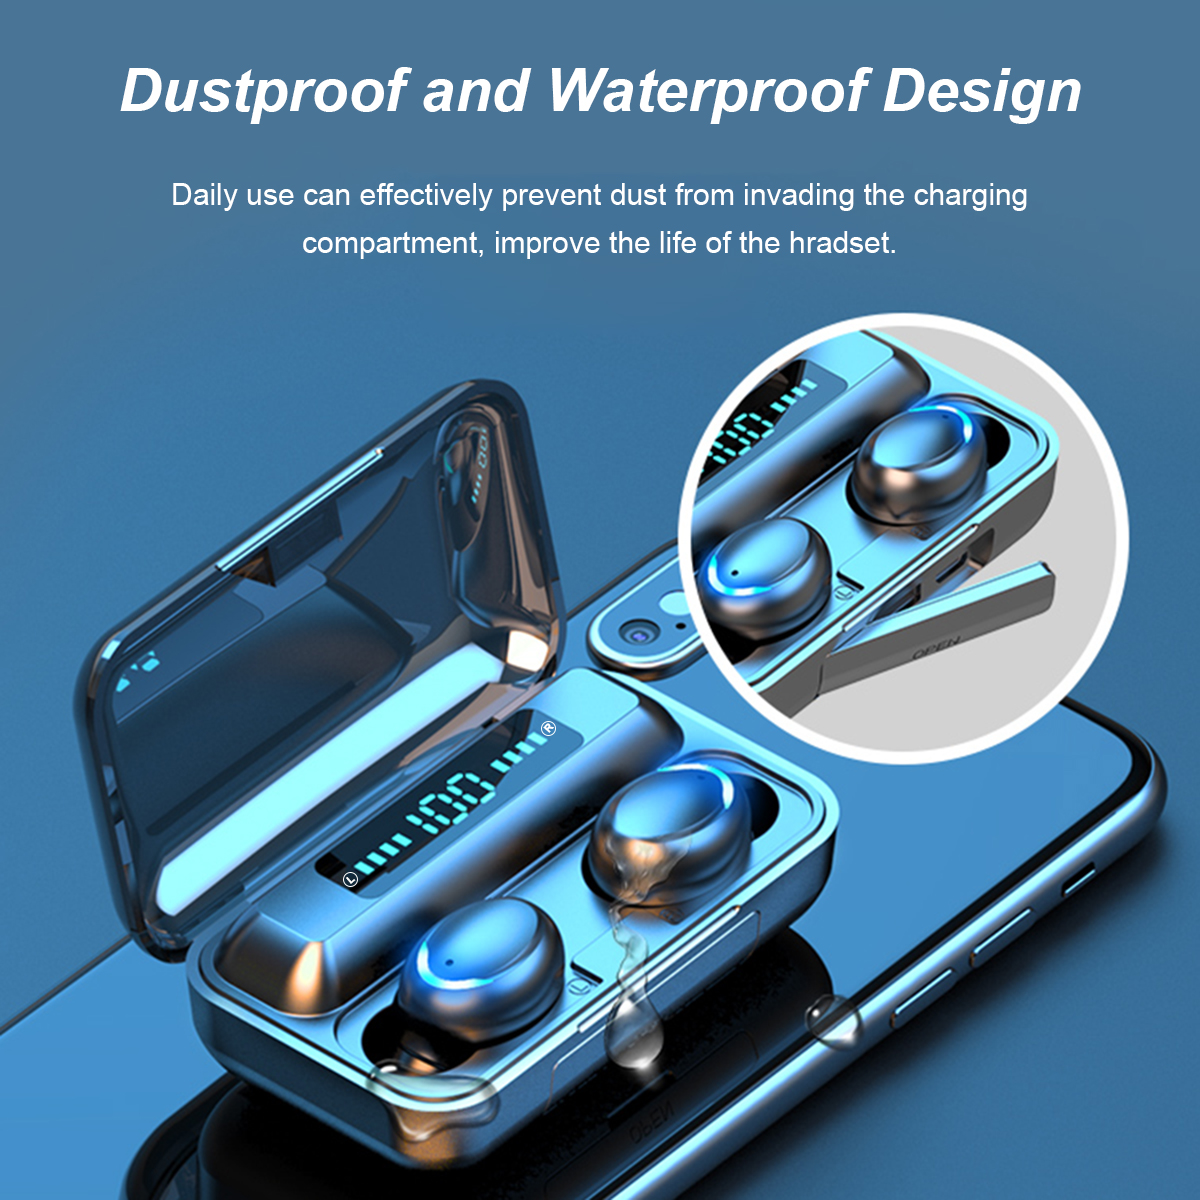 Mini-TWS-Wireless-bluetooth-50-Earphone-LED-Display-Power-Bank-Smart-Touch-Headphone-with-Mic-for-iP-1629900-4